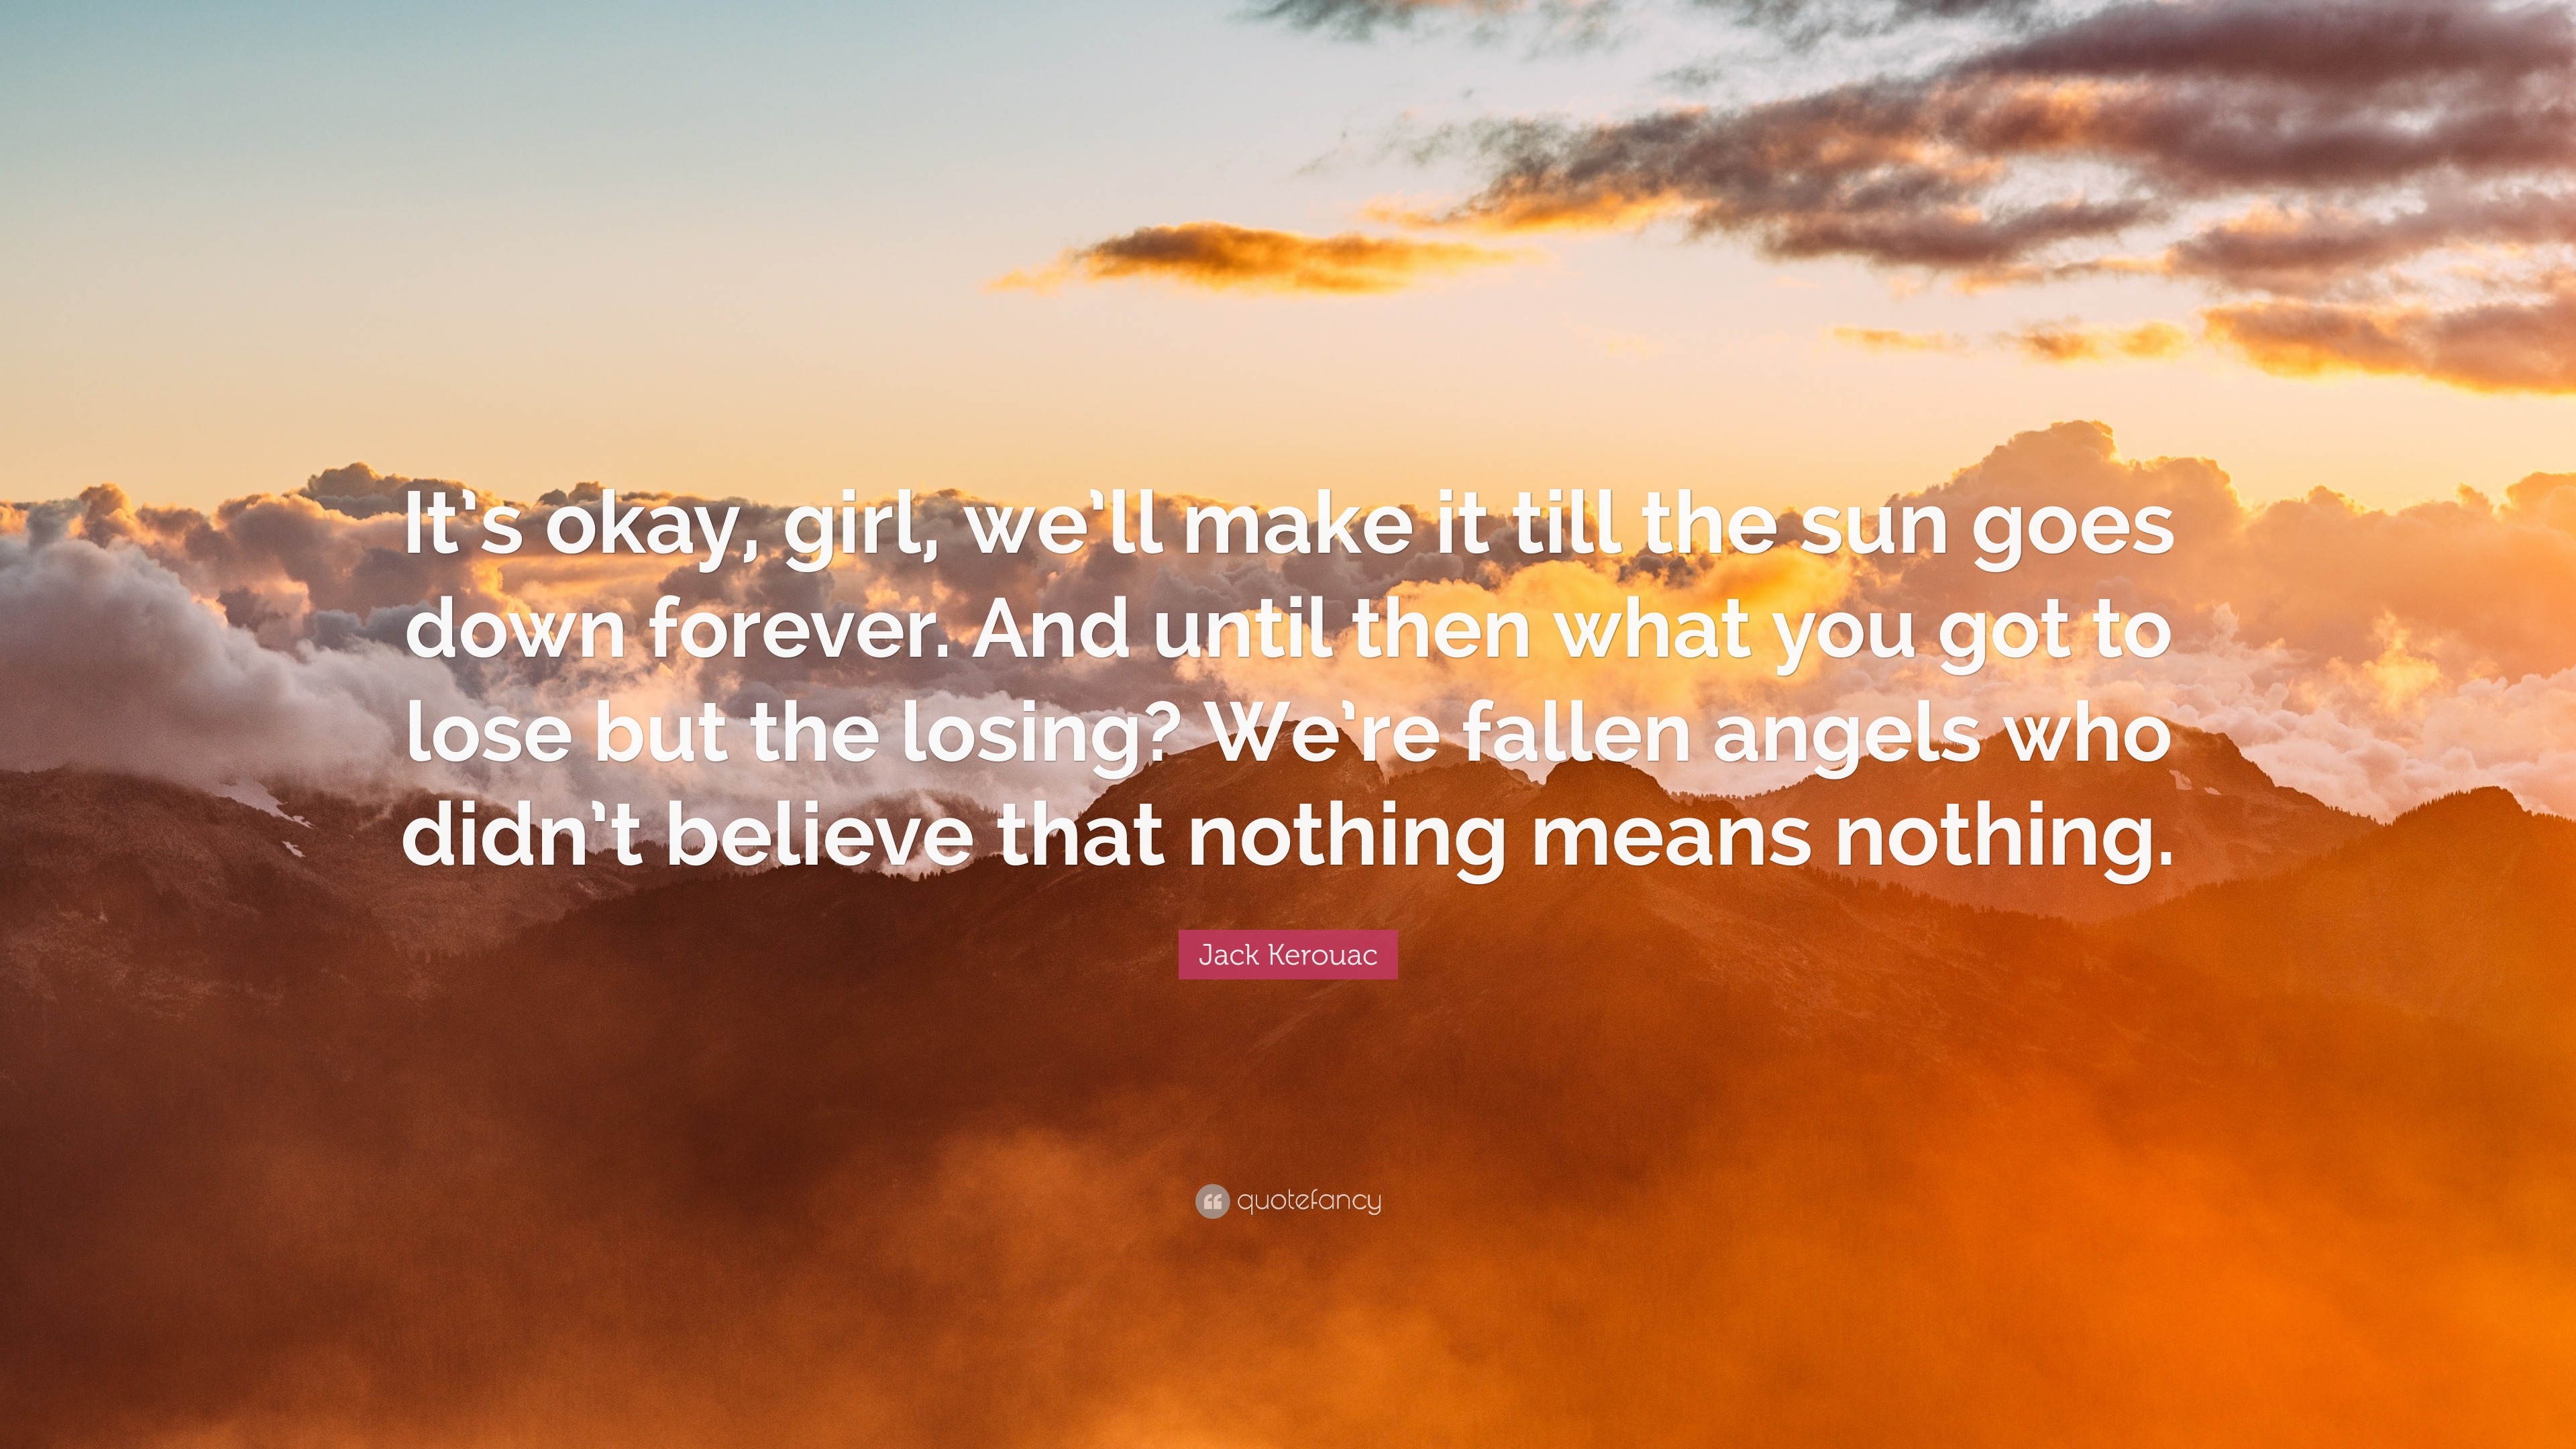 Jack Kerouac Quote It S Okay Girl We Ll Make It Till The Sun Goes Down Forever And Until Then What You Got To Lose But The Losing We Re 7 Wallpapers Quotefancy jack kerouac quote it s okay girl